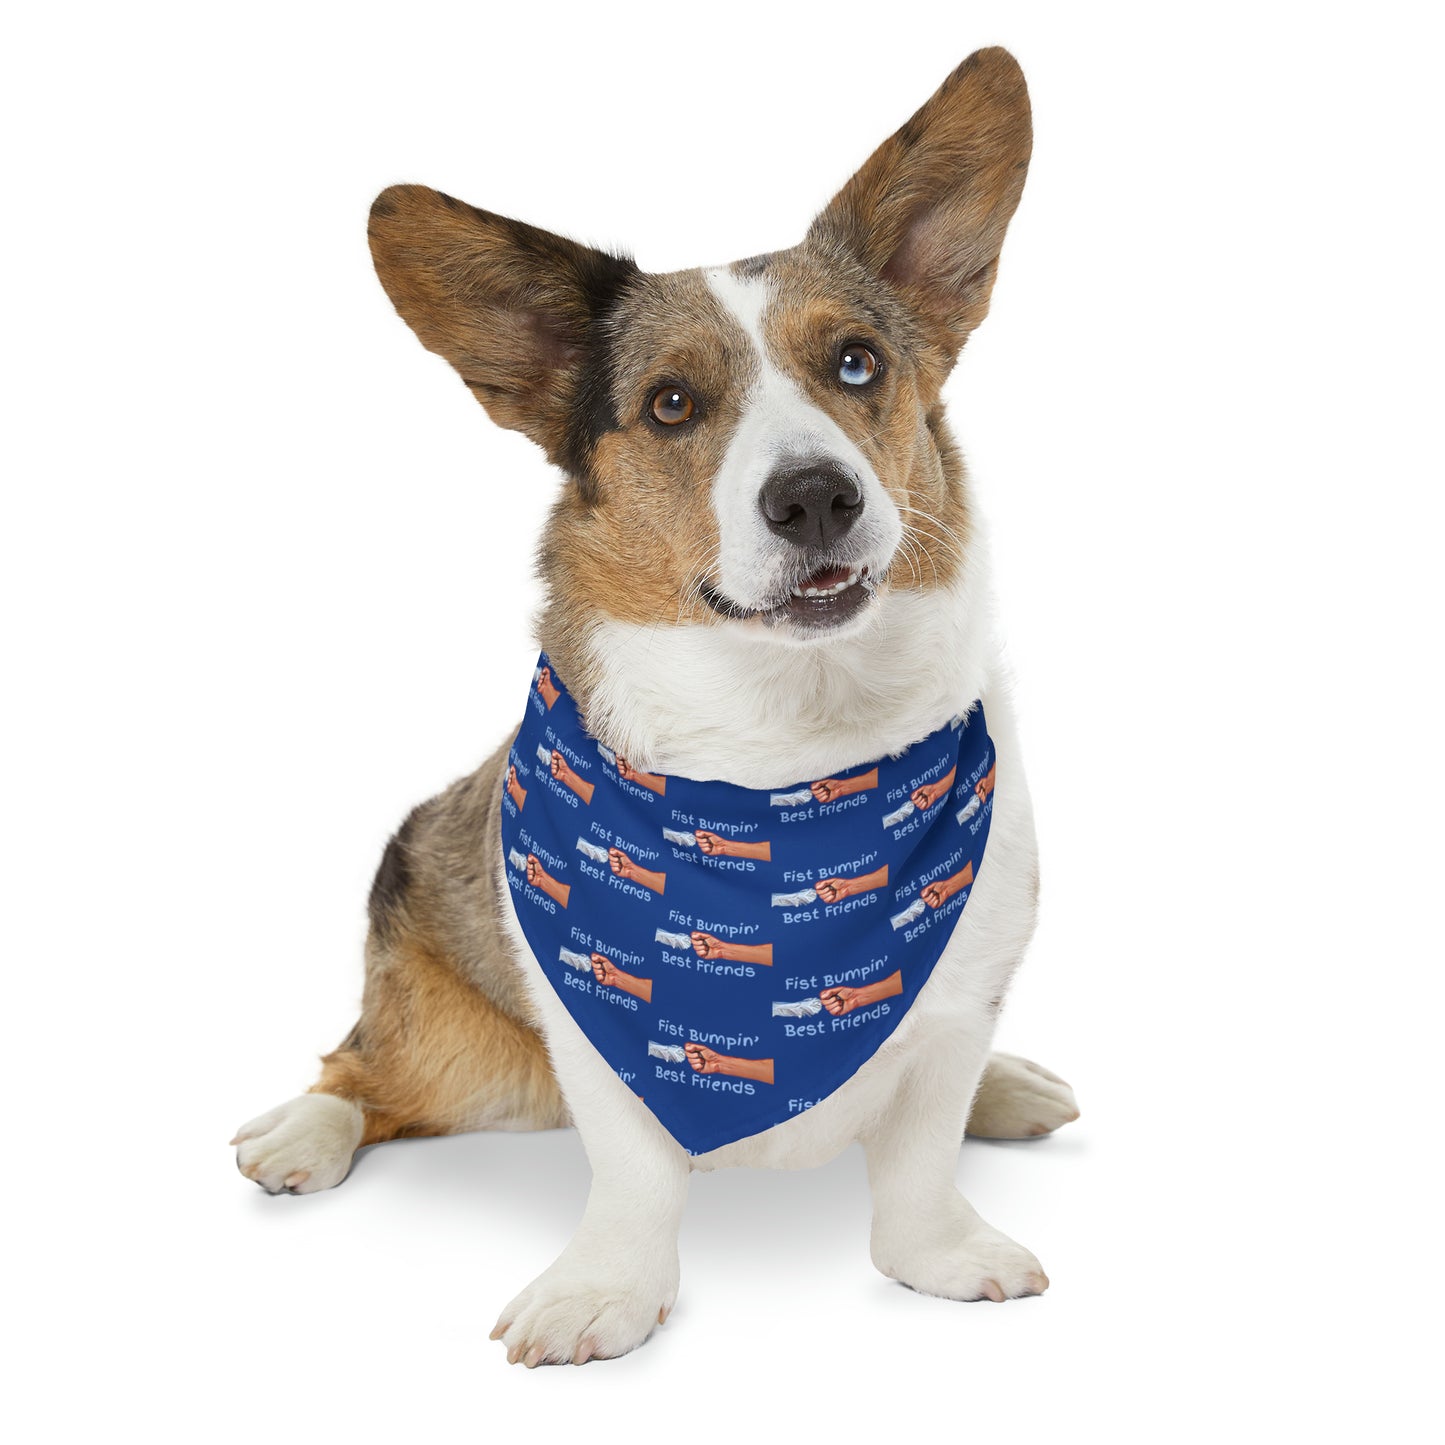 Fist Bumpin’ Best Friends Opie’s Cavalier King Charles Spaniel Paw Pet Bandana Collar Blue with Light Blue lettering